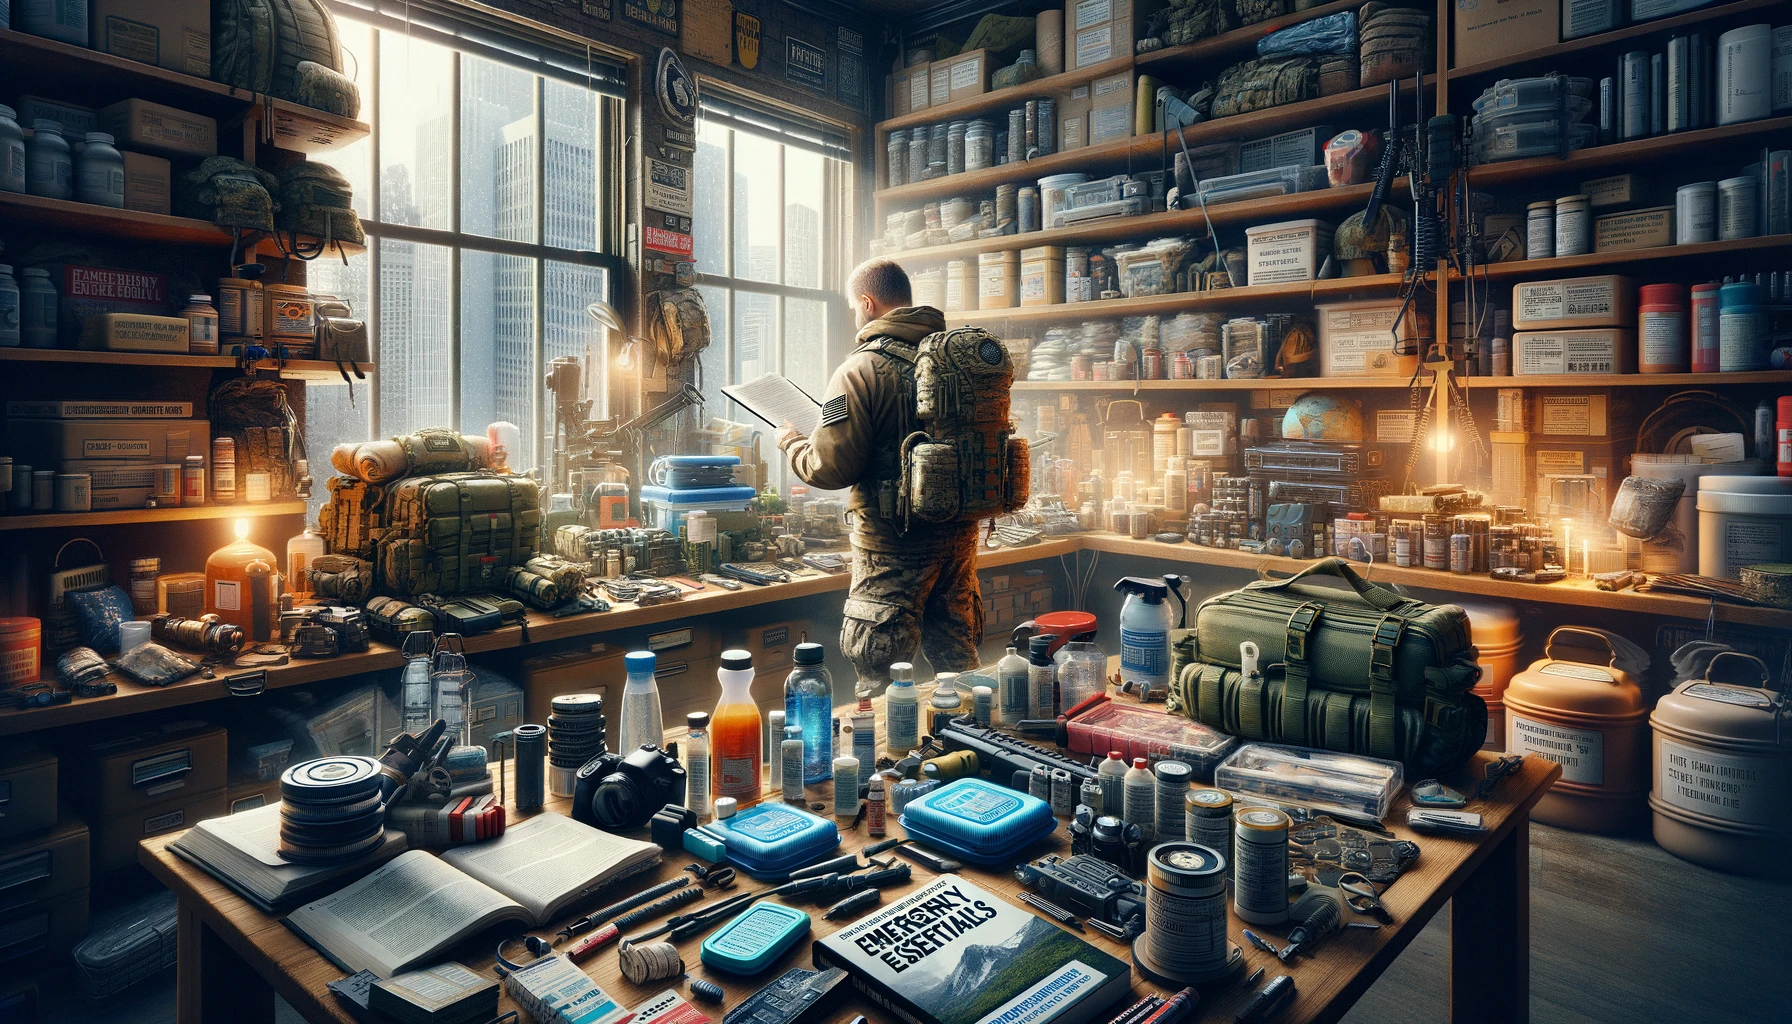 Individual in a prepper's workshop surrounded by emergency essentials and prepping materials, engaging with survival gear and manuals, demonstrating thorough preparation for any scenario, with an urban context in the background